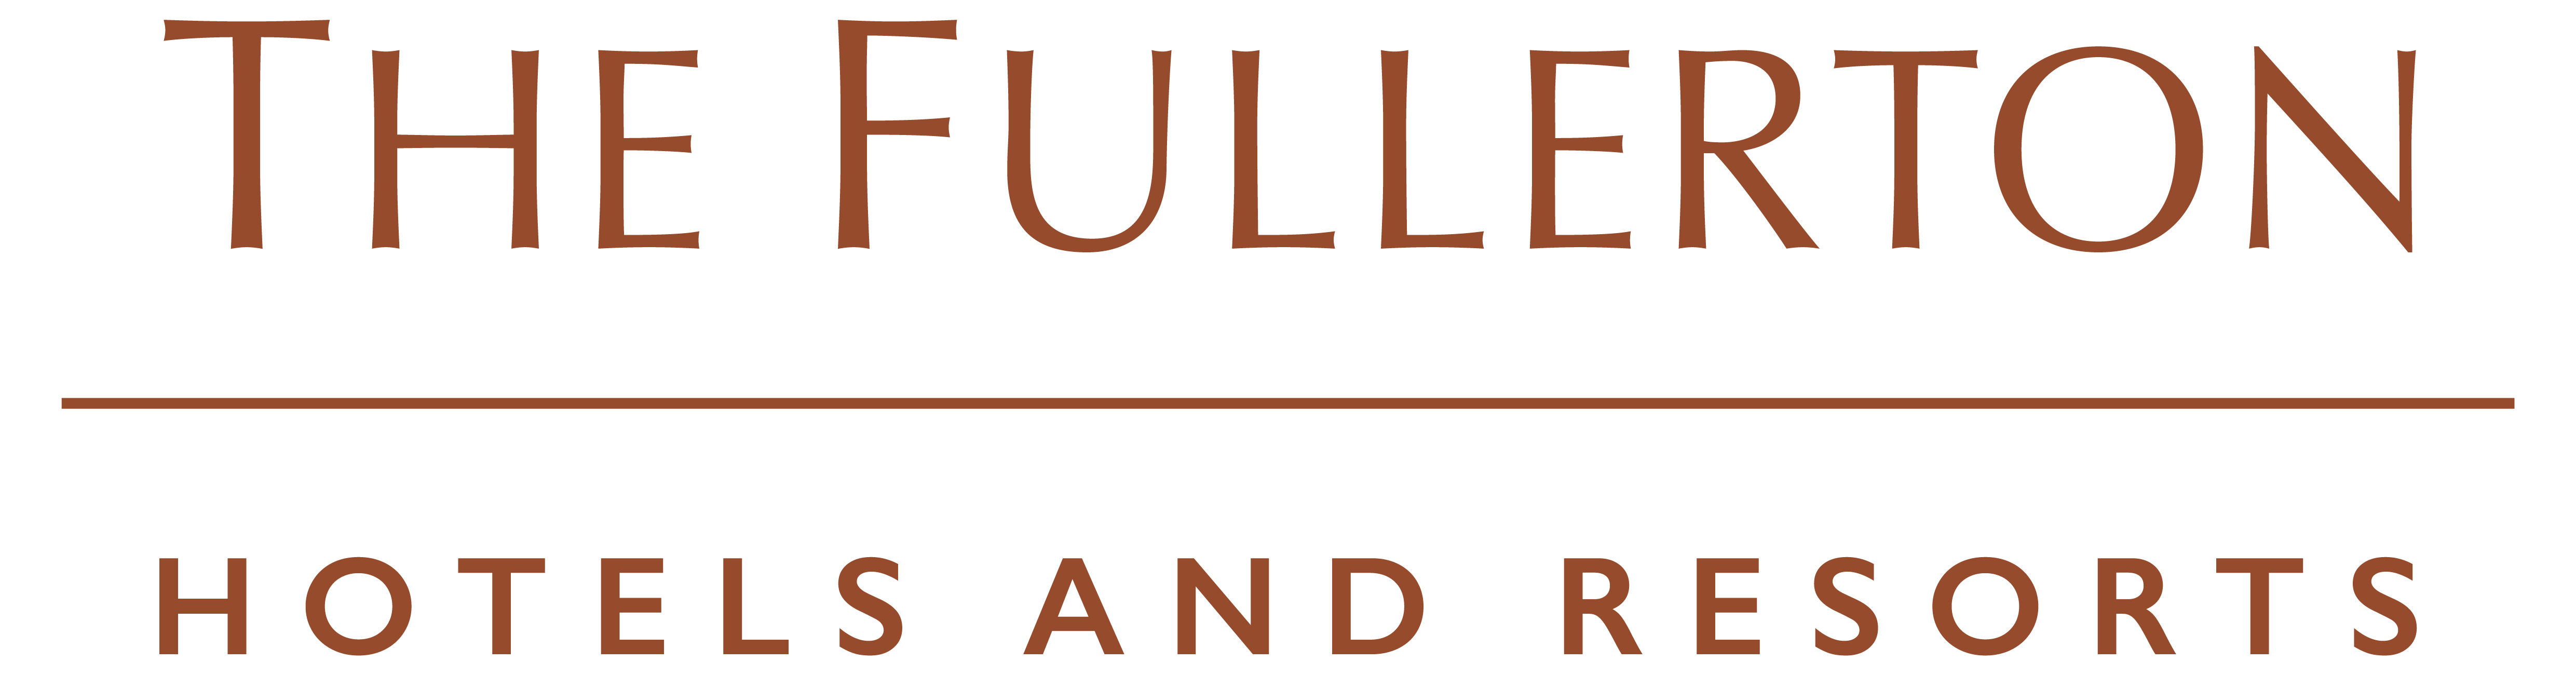 The Fullerton Hotels and Resorts